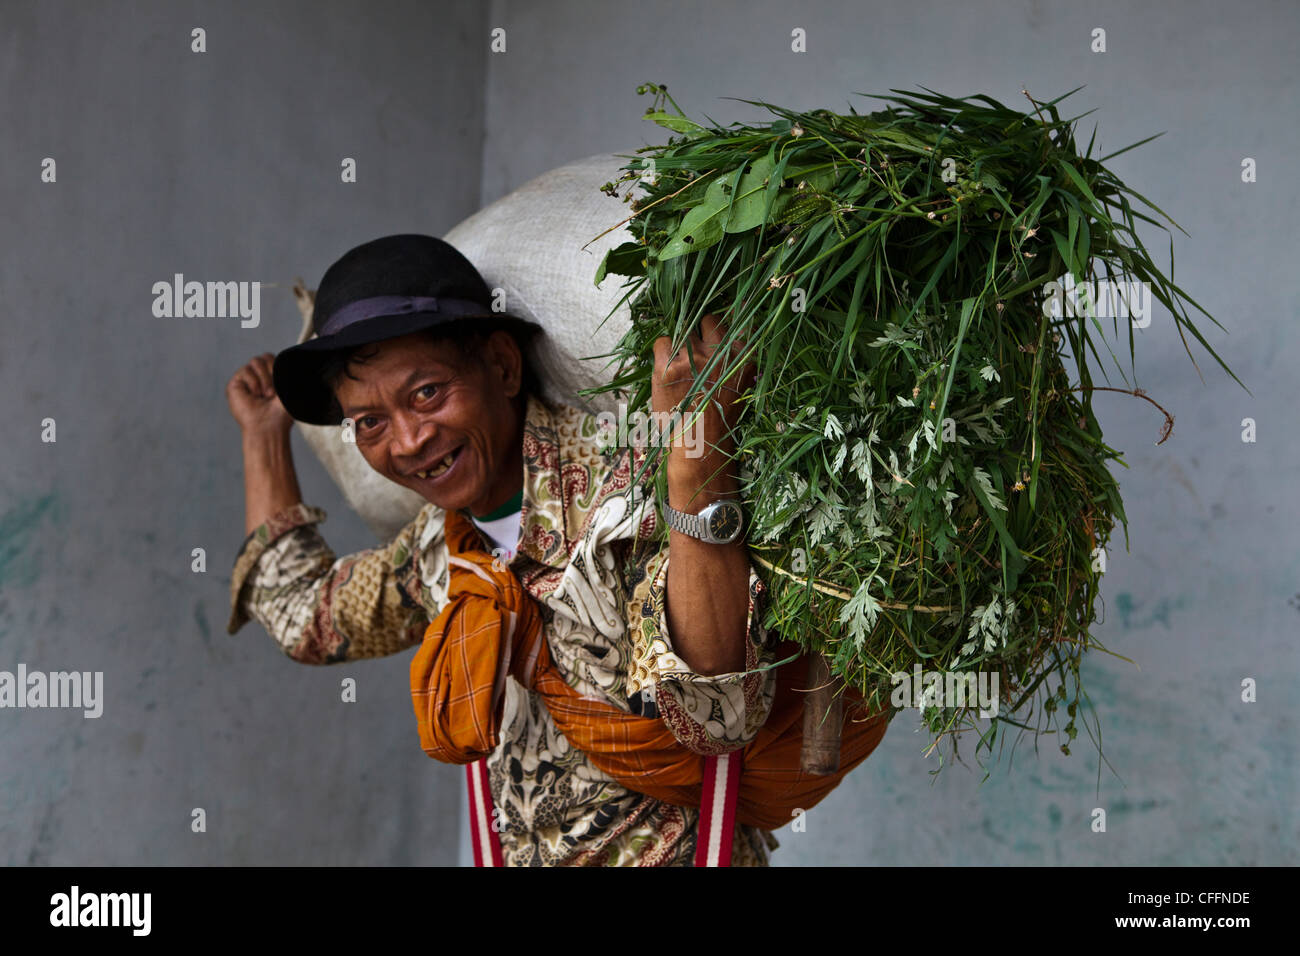 Local People carrying grass and plants in a village of Dieng plateau, Java, Indonesia, Pacific, South Asia Stock Photo